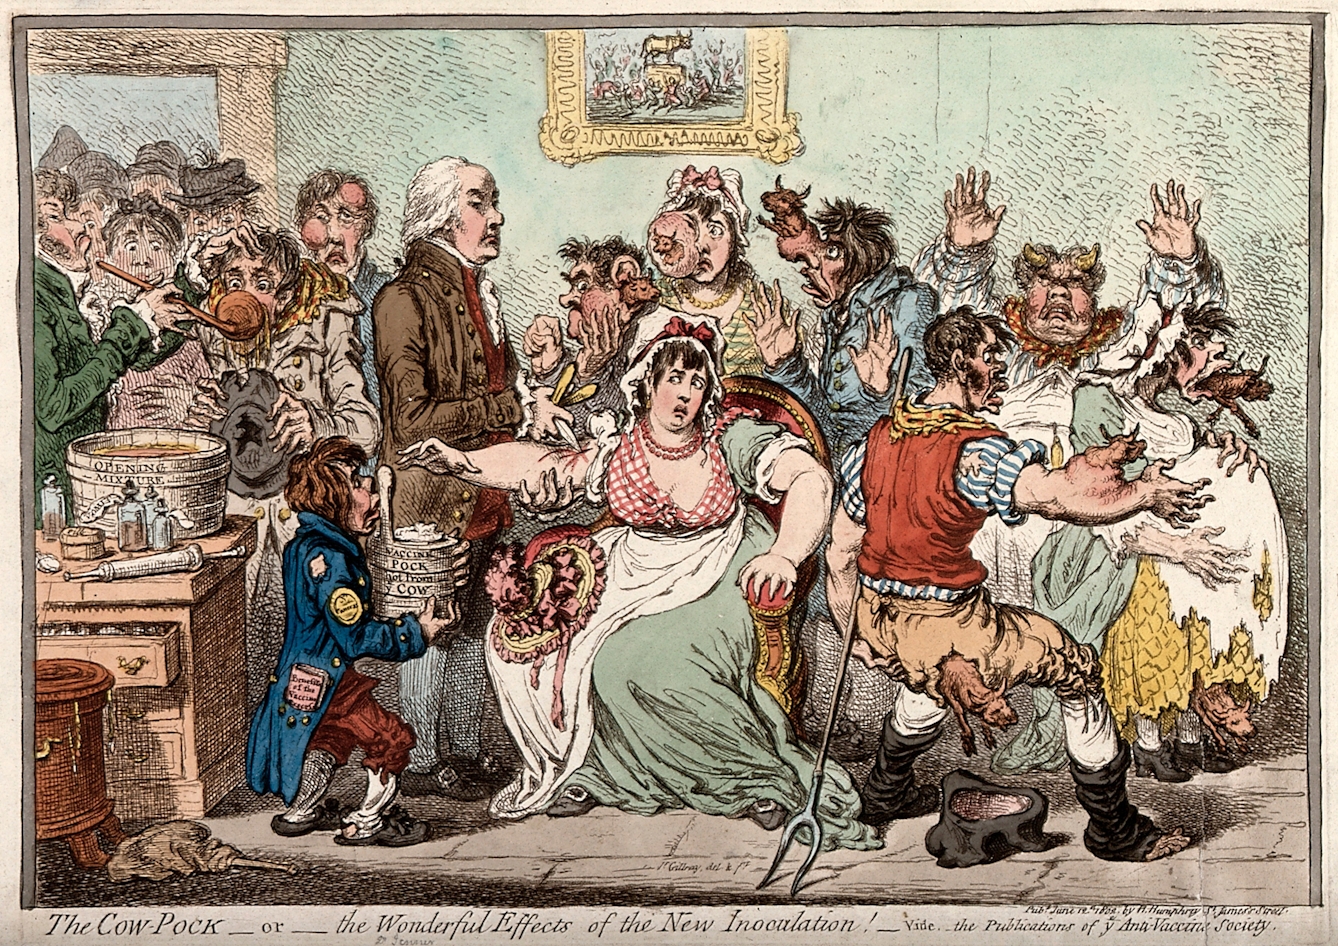 Edward Jenner inoculating patients in the Smallpox and Inoculation Hospital at St. Pancras. The patients are shown comedically sprouting cow heads from various parts of their anatomy following the vaccination. 